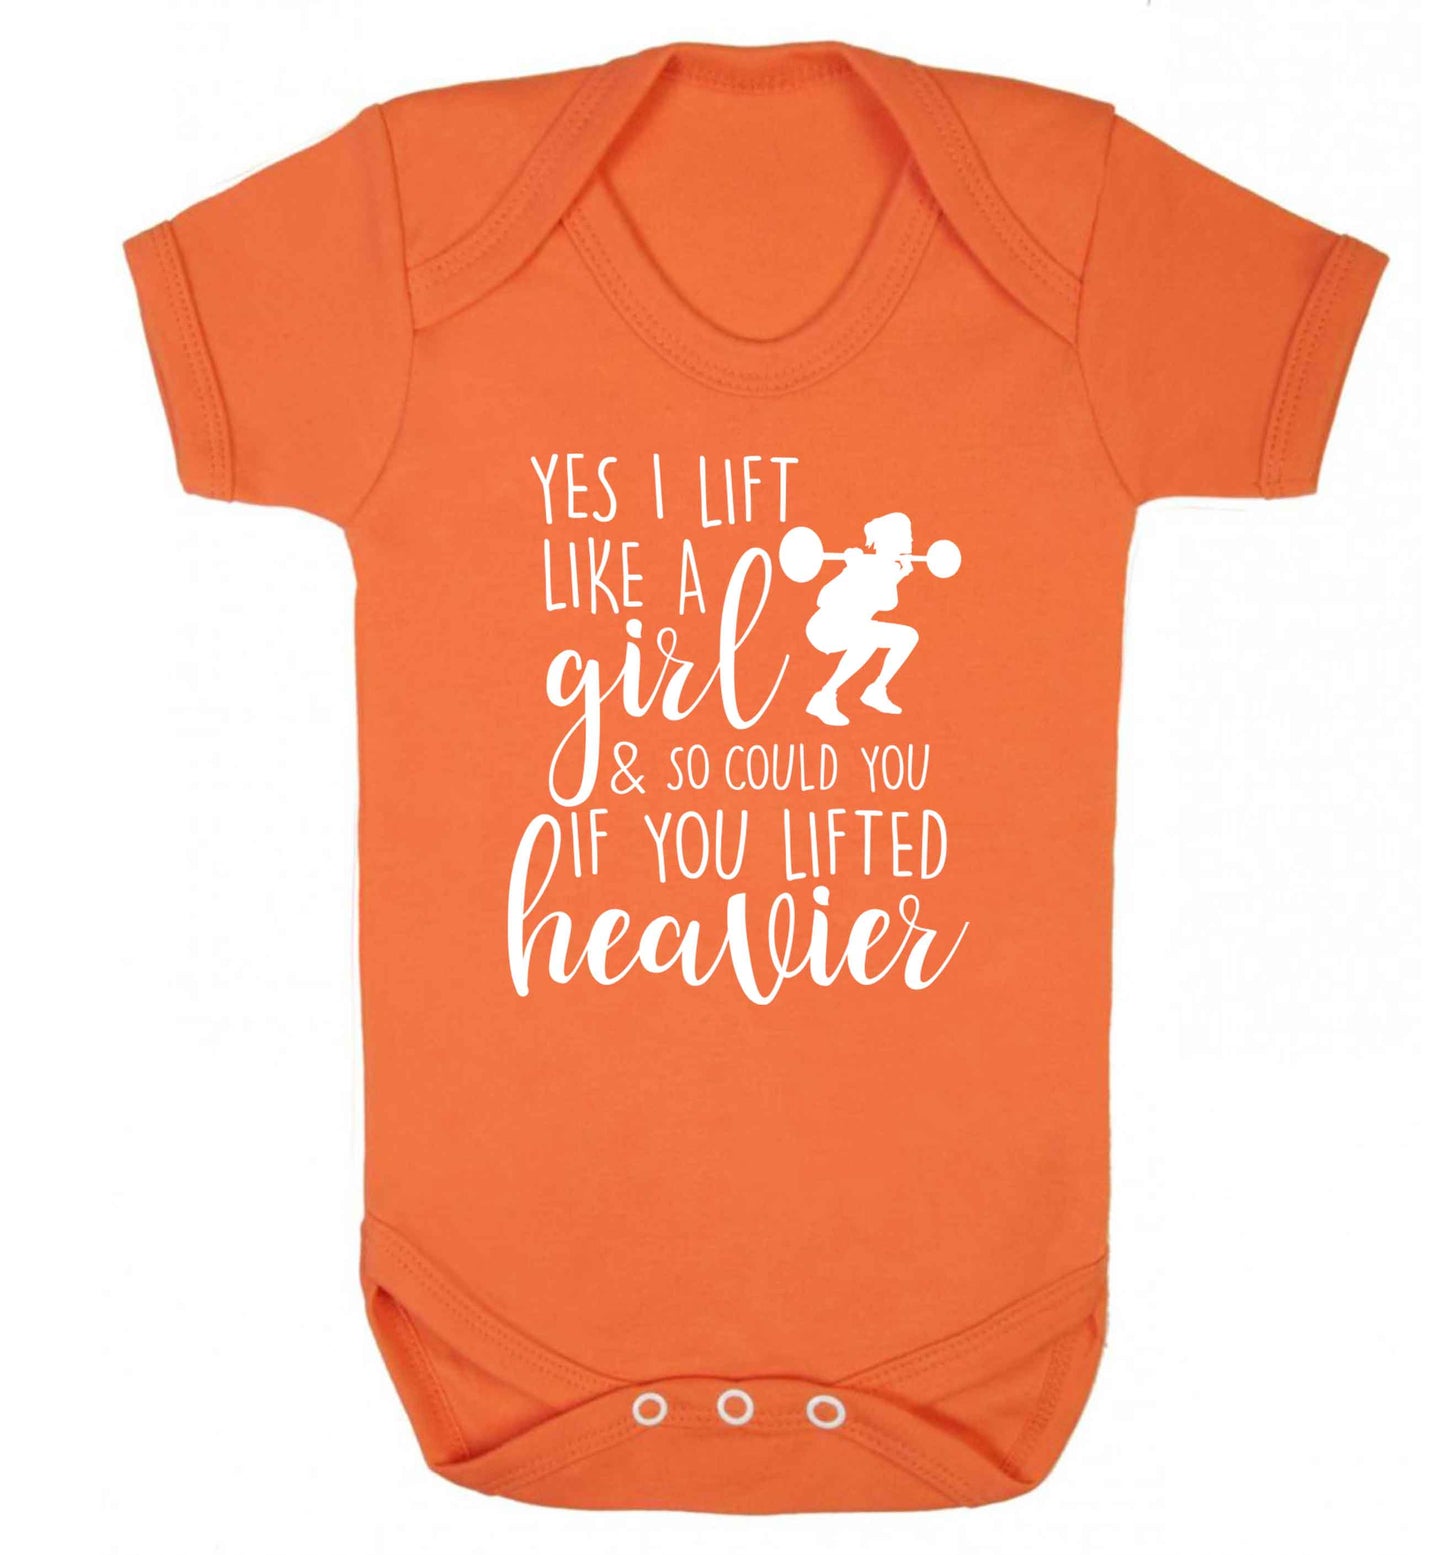 Yes I lift like a girl and so could you if you lifted heavier Baby Vest orange 18-24 months